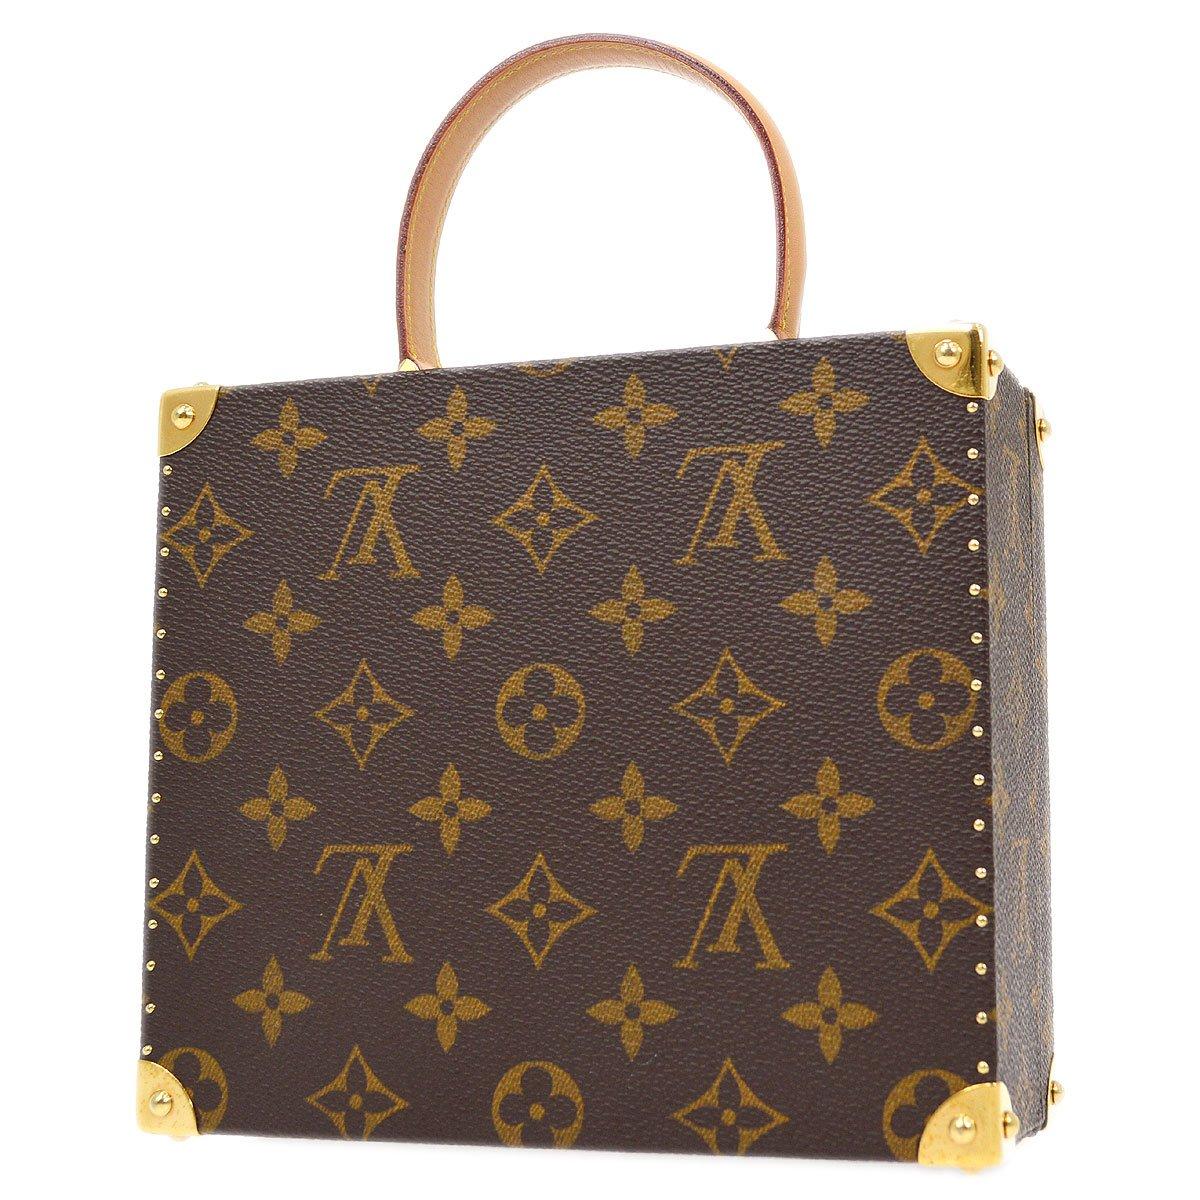 Pre-Owned Vintage Condition
From 2003 Collection
Monogram Canvas
Leather
Includes Dust Bag
W 7.3 x H 6.3 x D 3.0 